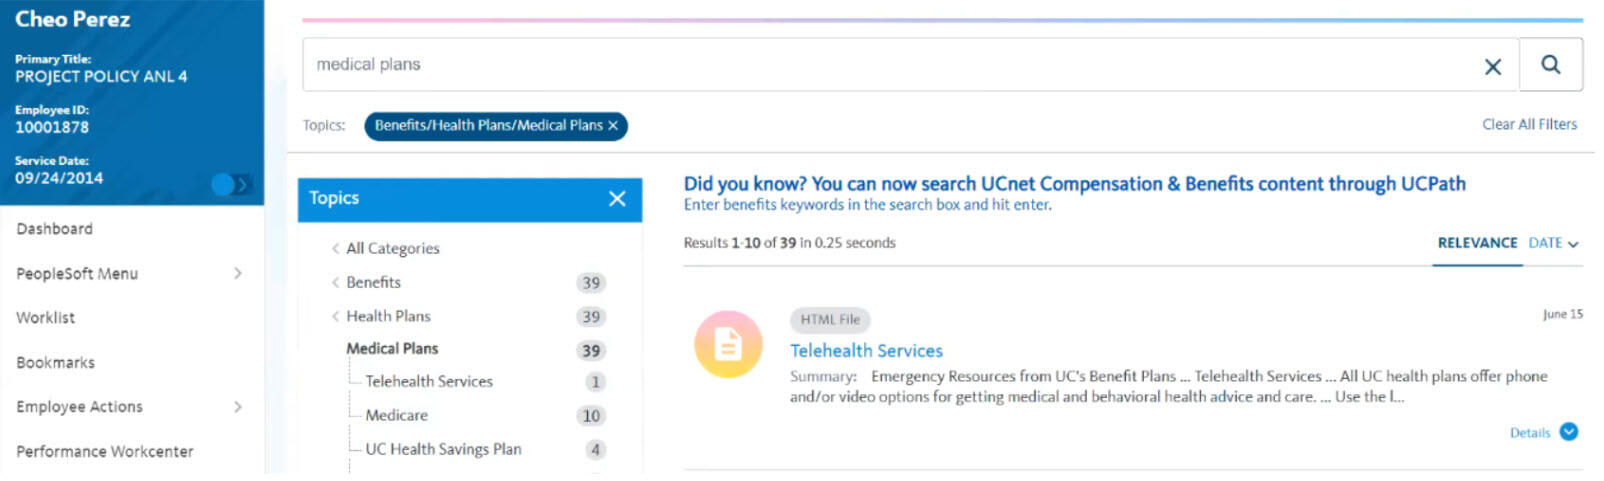 image of searching for ucnet page through ucpath